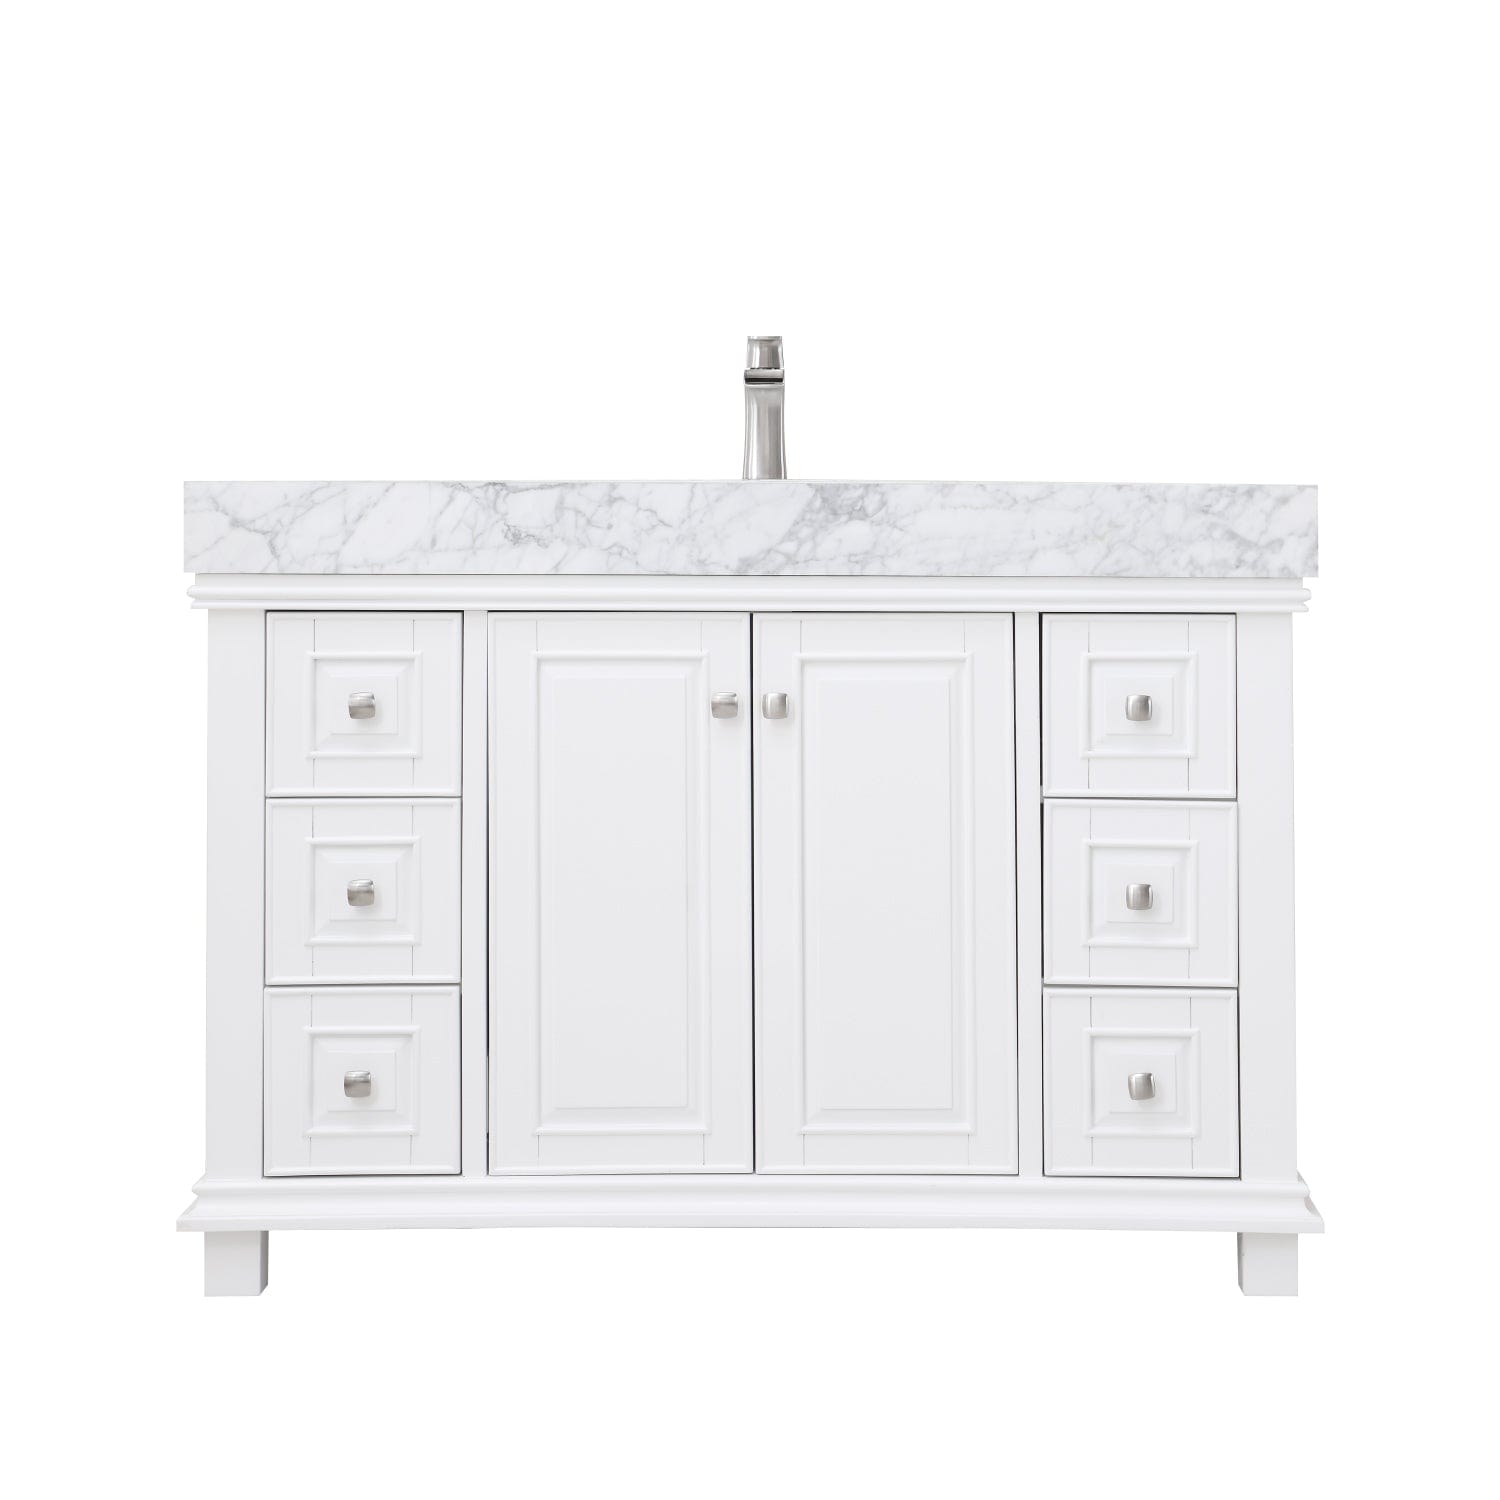 Altair Jardin 48" Single Bathroom Vanity Set in White and Carrara White Marble Countertop without Mirror 539048-WH-CA-NM - Molaix631112971027Vanity539048-WH-CA-NM